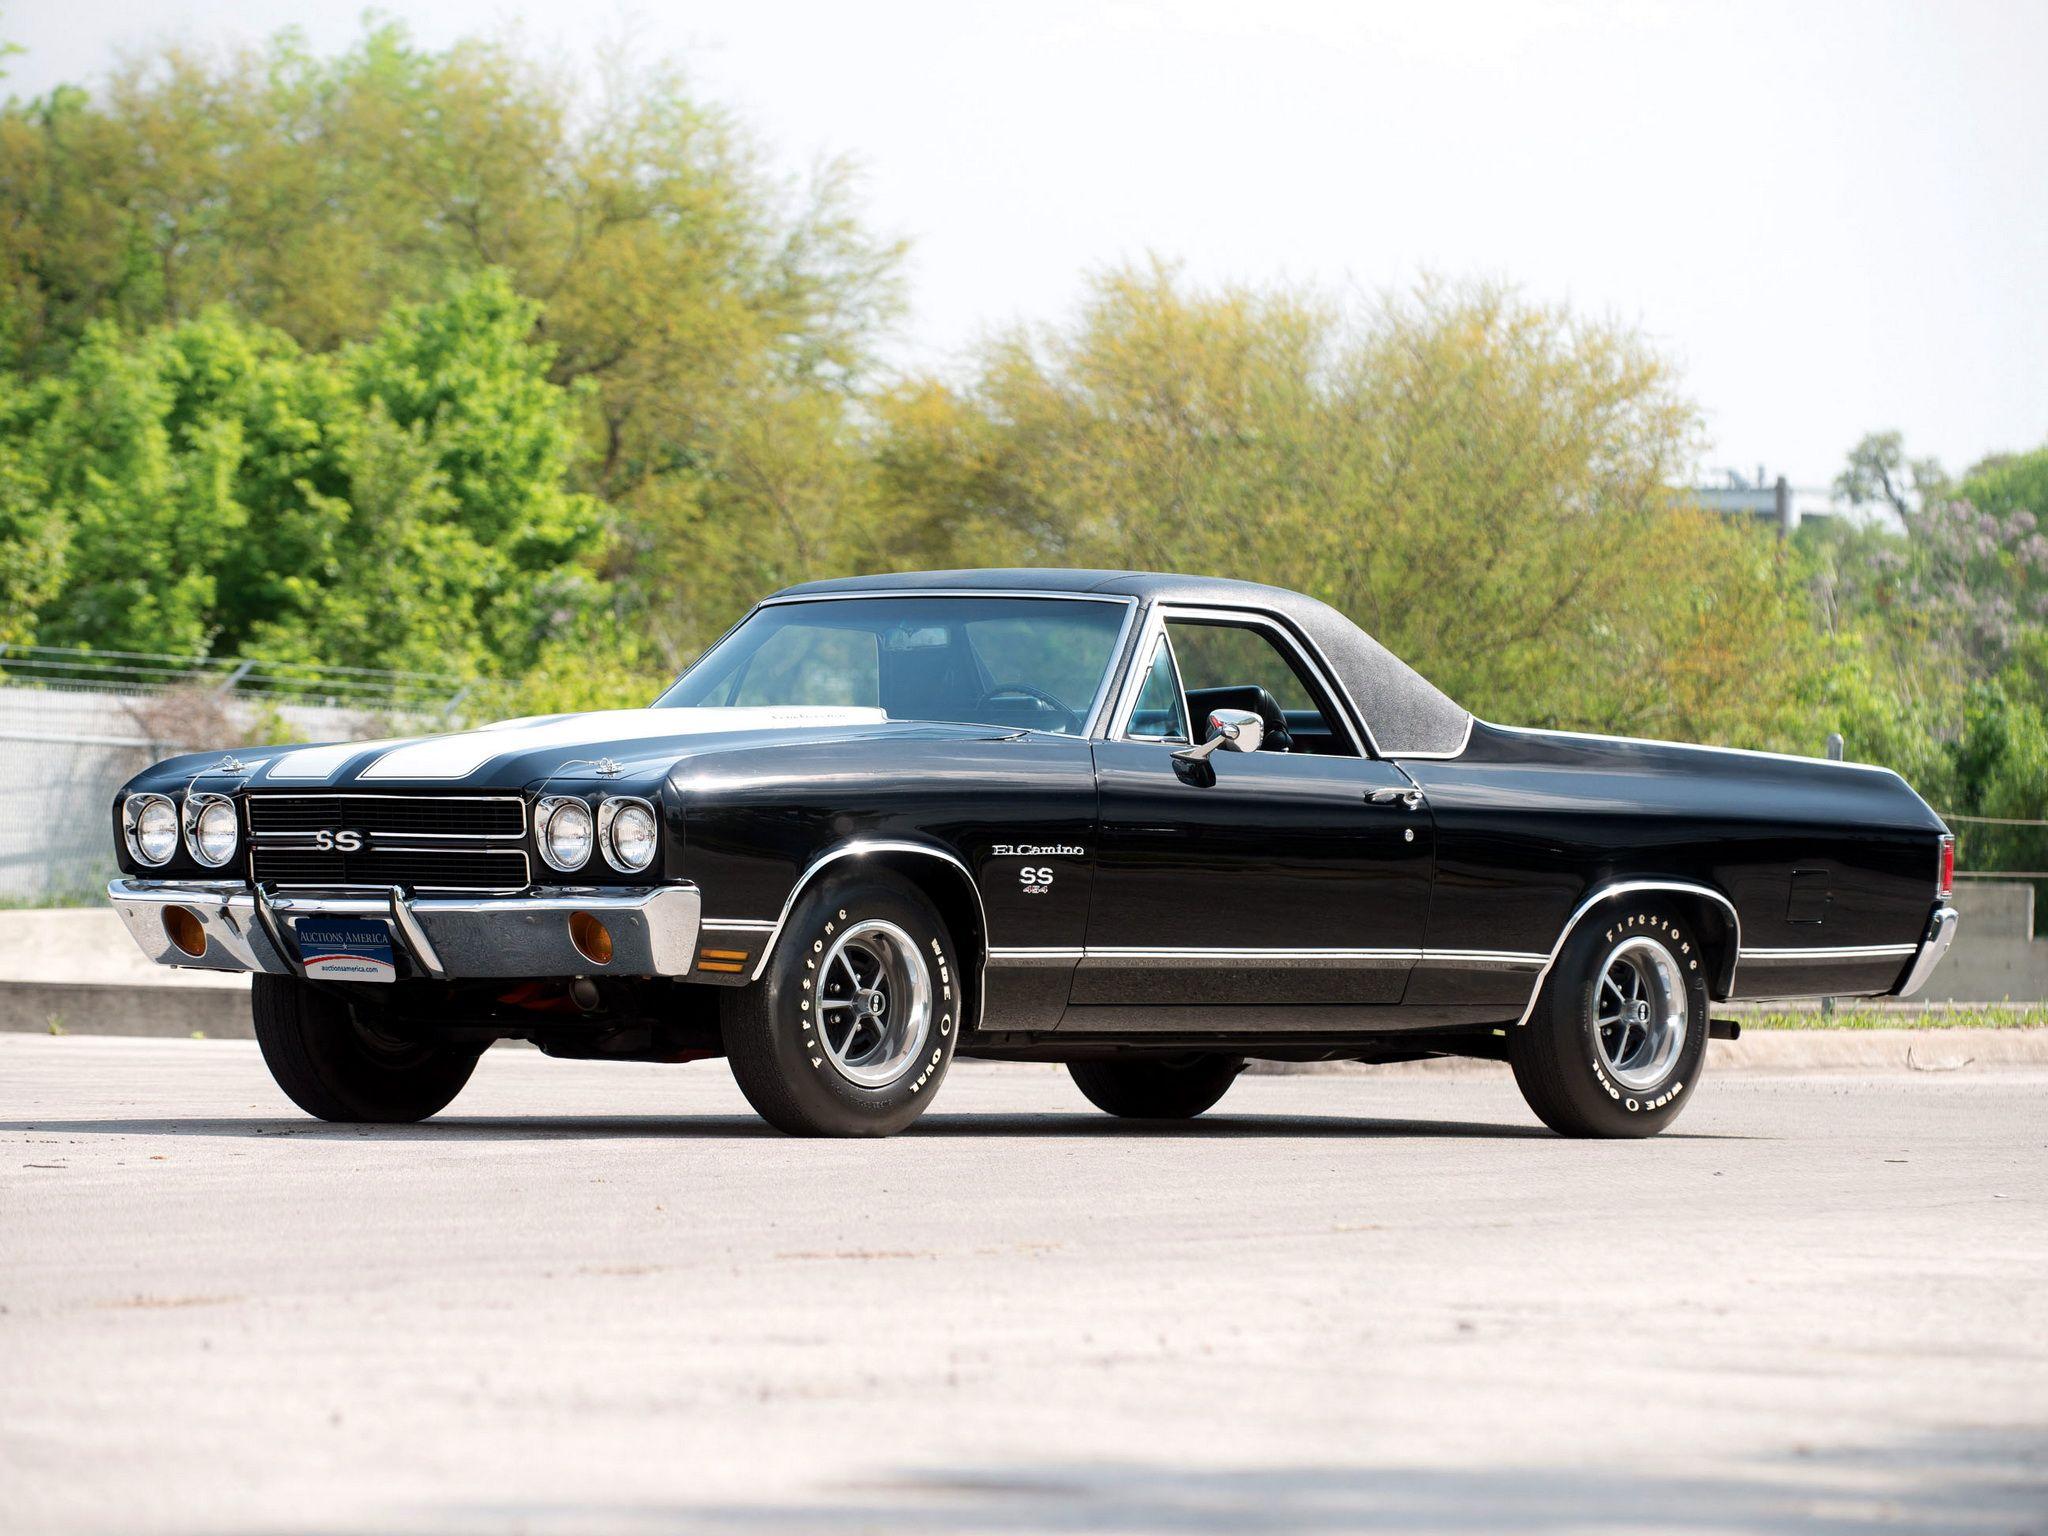 Chevrolet El Camino Wallpaper HD Photo, Wallpaper and other Image